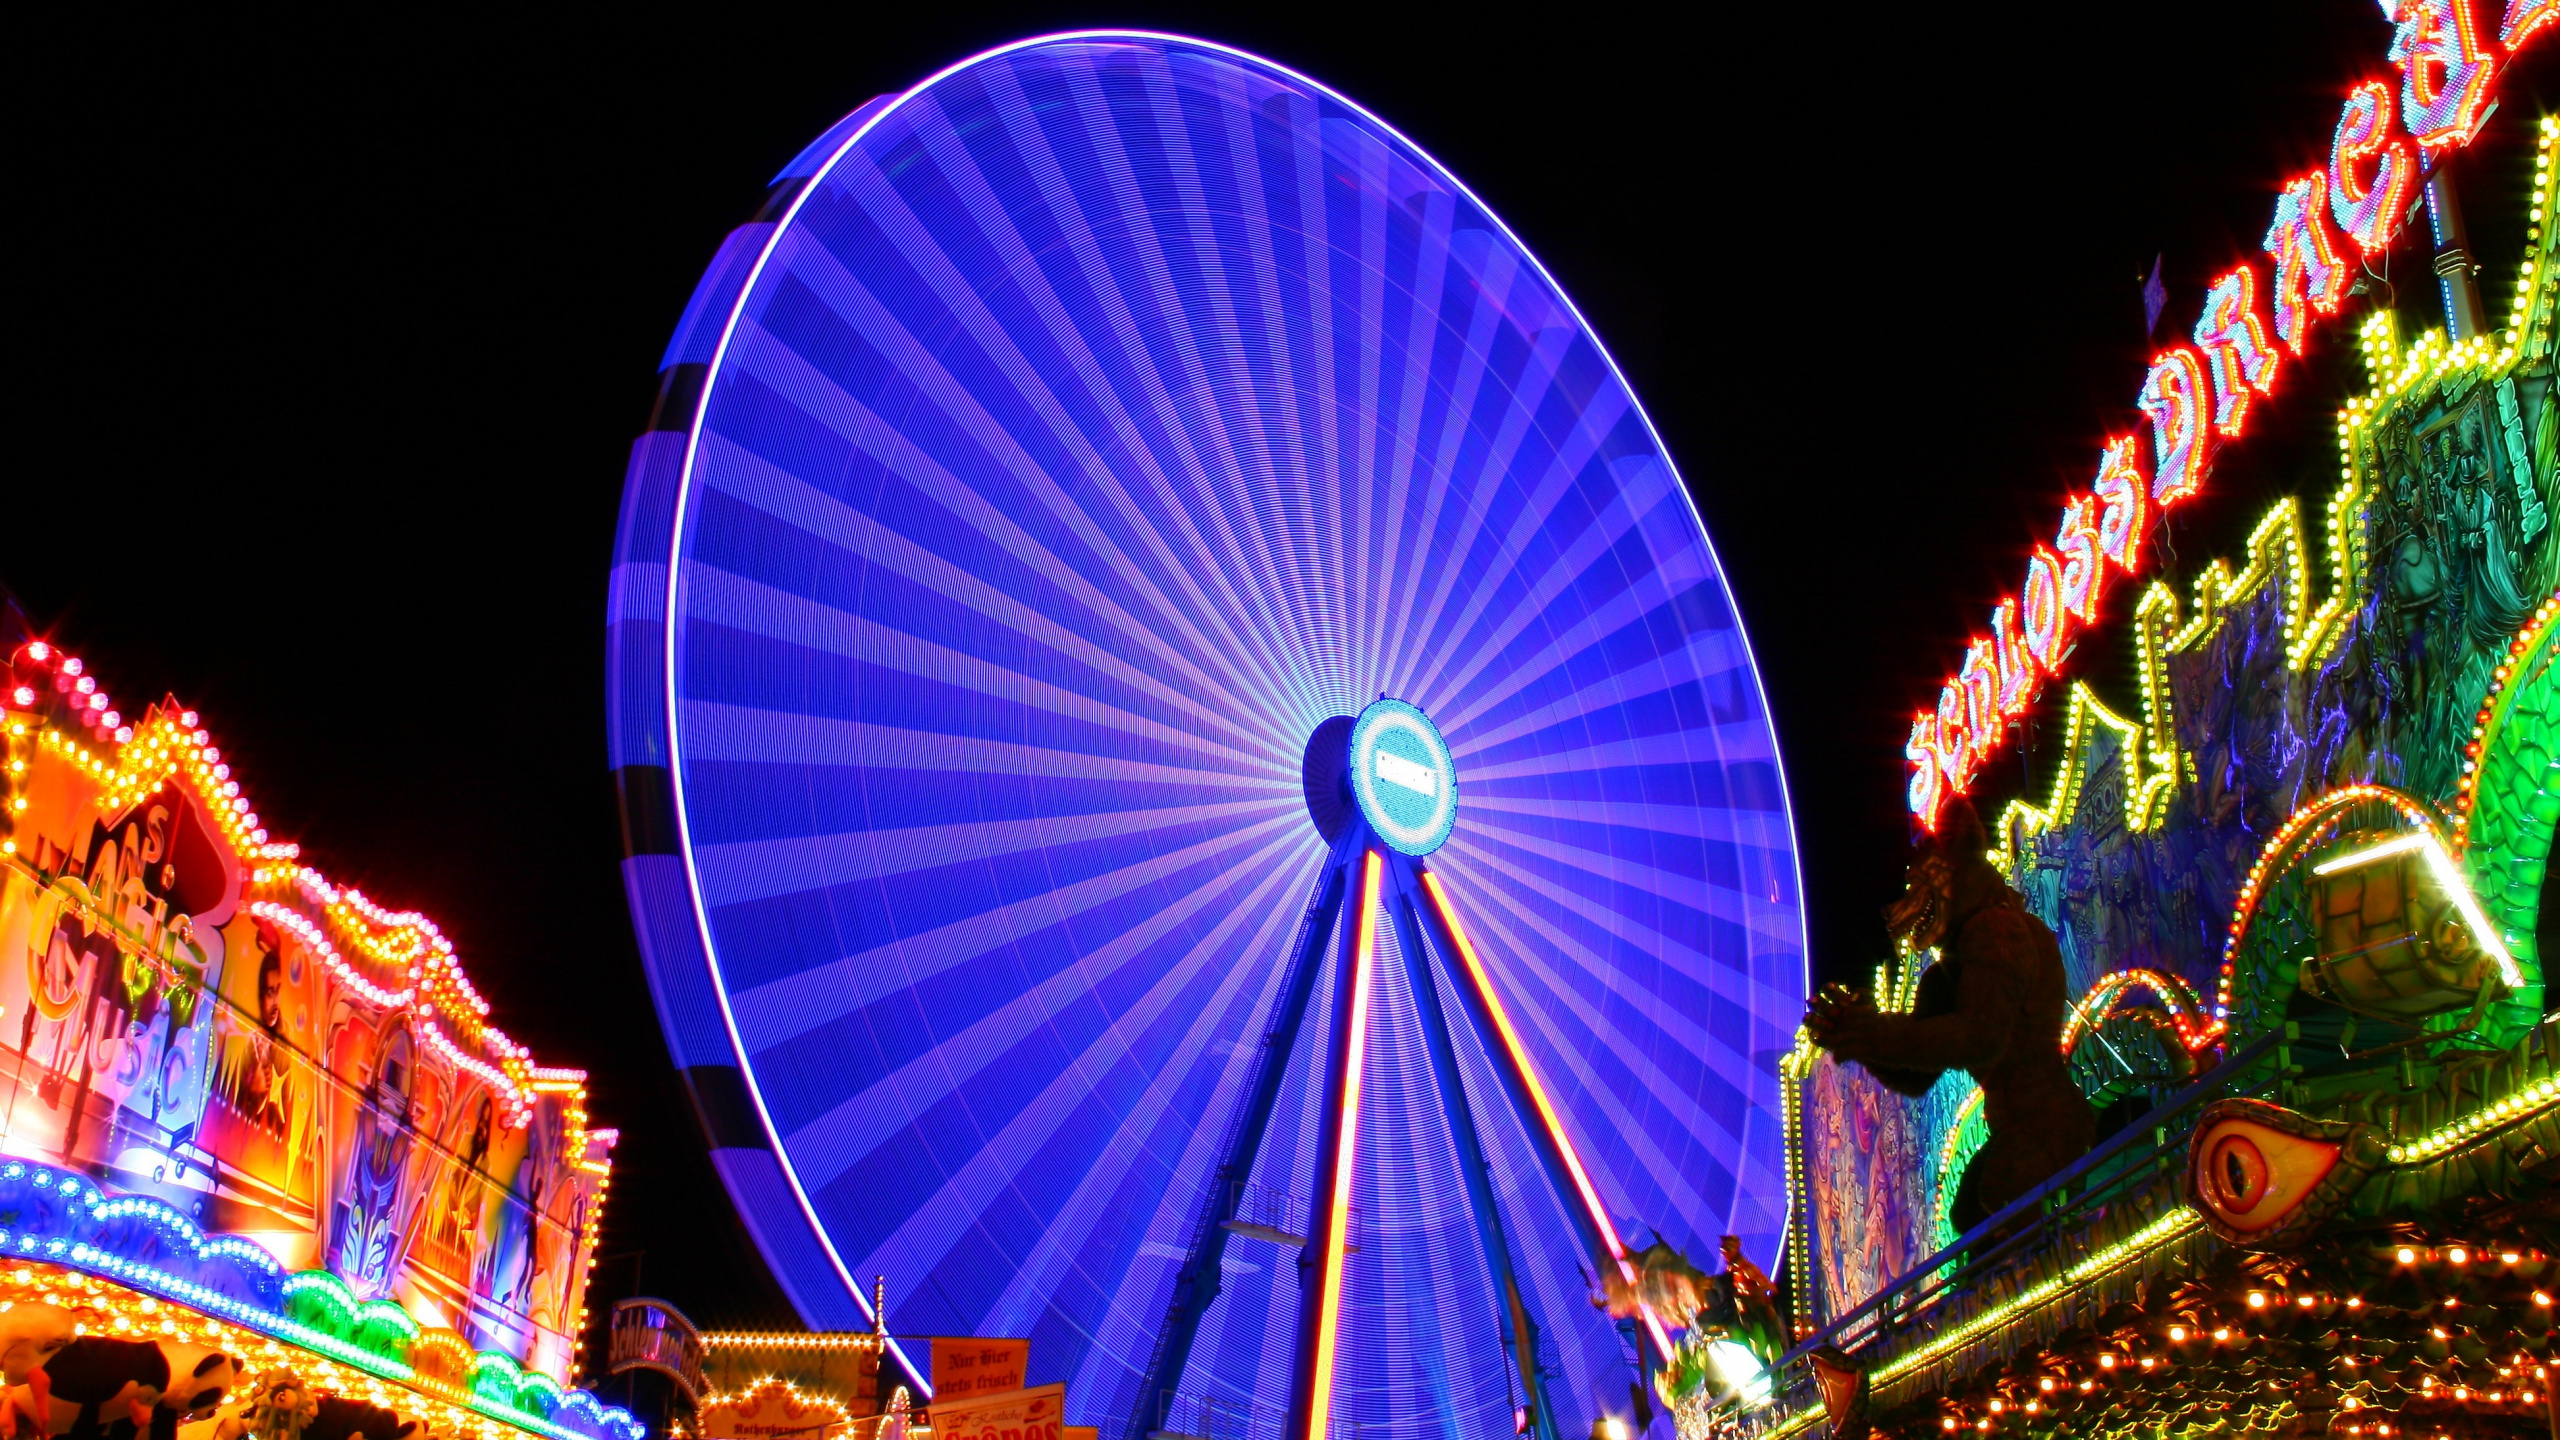 Blue and Red Ferris Wheel During Night Time. Wallpaper in 2560x1440 Resolution